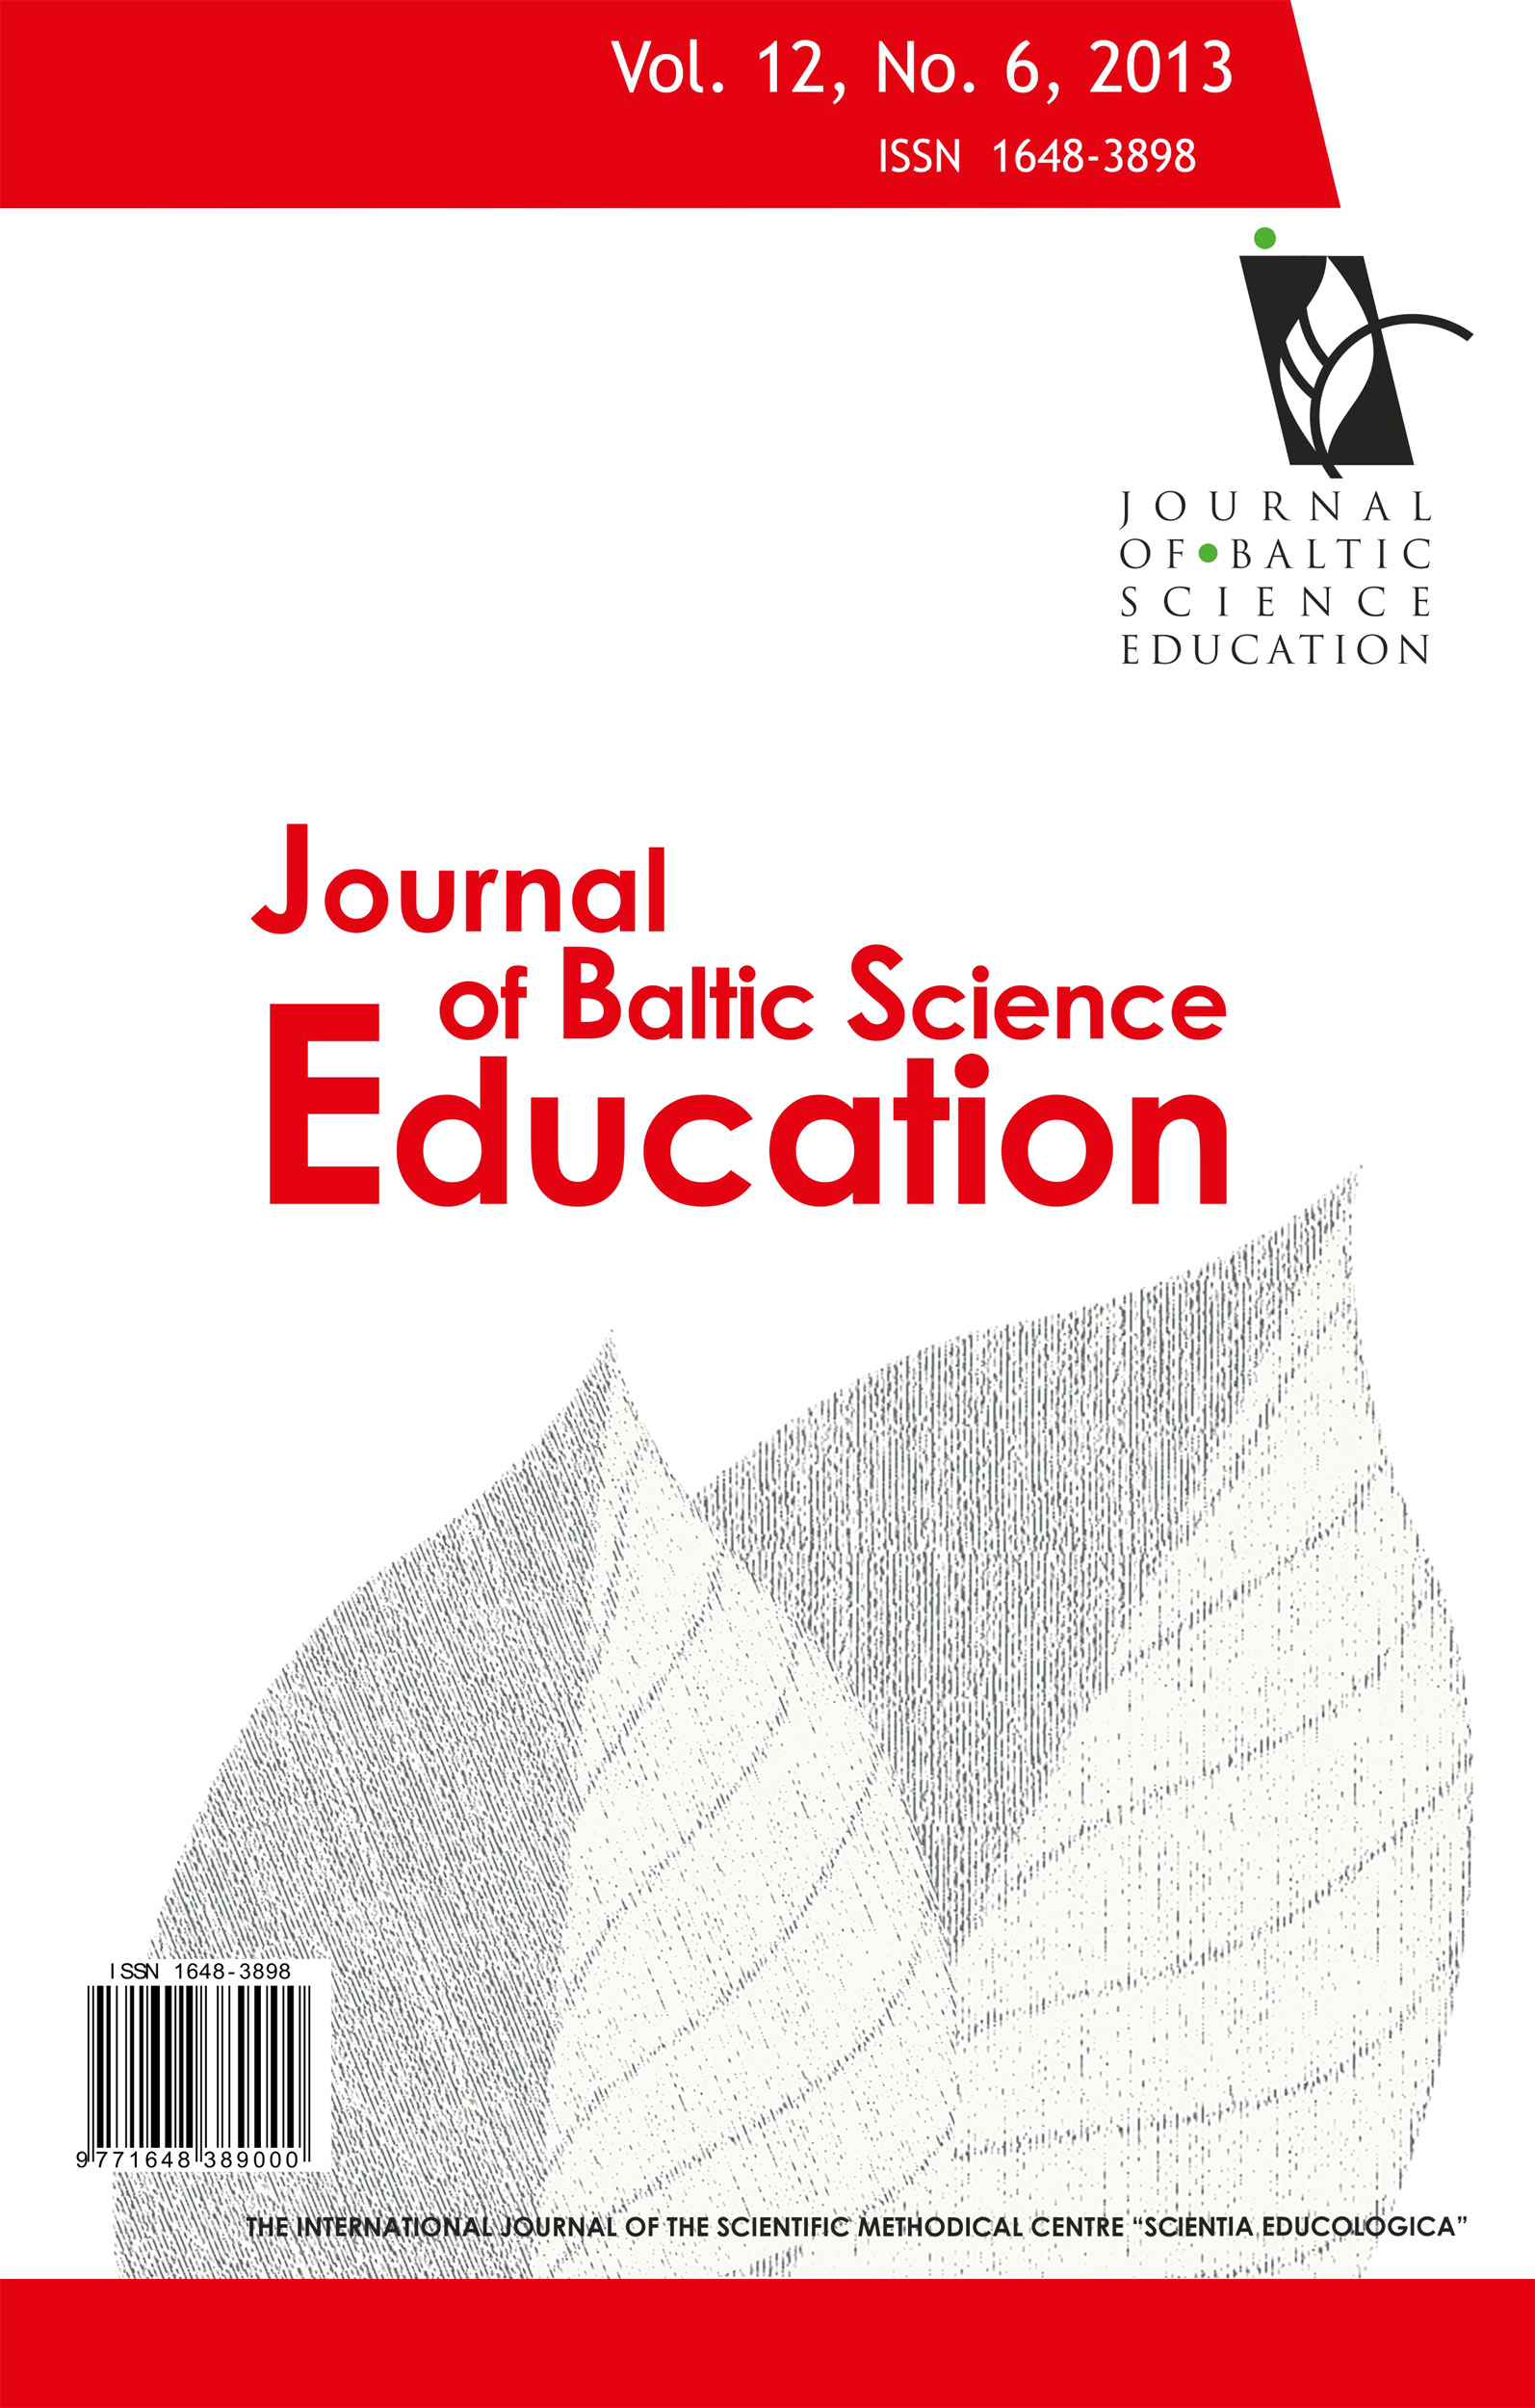 TURKISH PRE-SERVICE TEACHERS’ VIEWS OF SCIENCE-TECHNOLOGY-SOCIETY: INFLUENCE OF A HISTORY OF SCIENCE COURSE